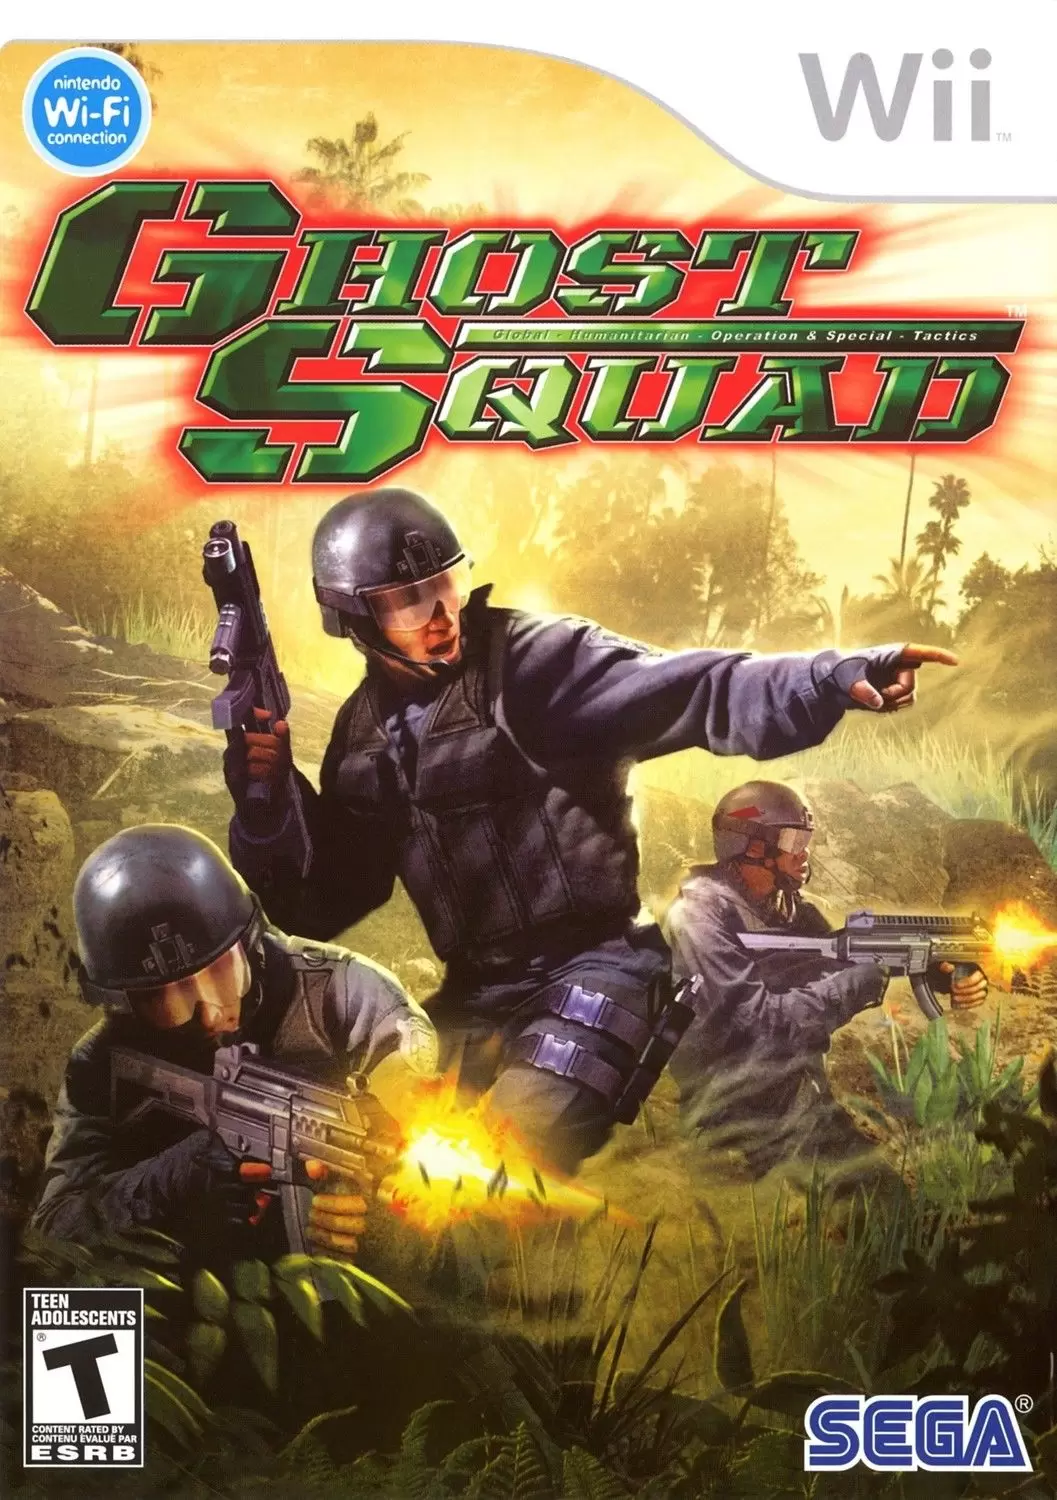 Nintendo Wii Games - Ghost Squad